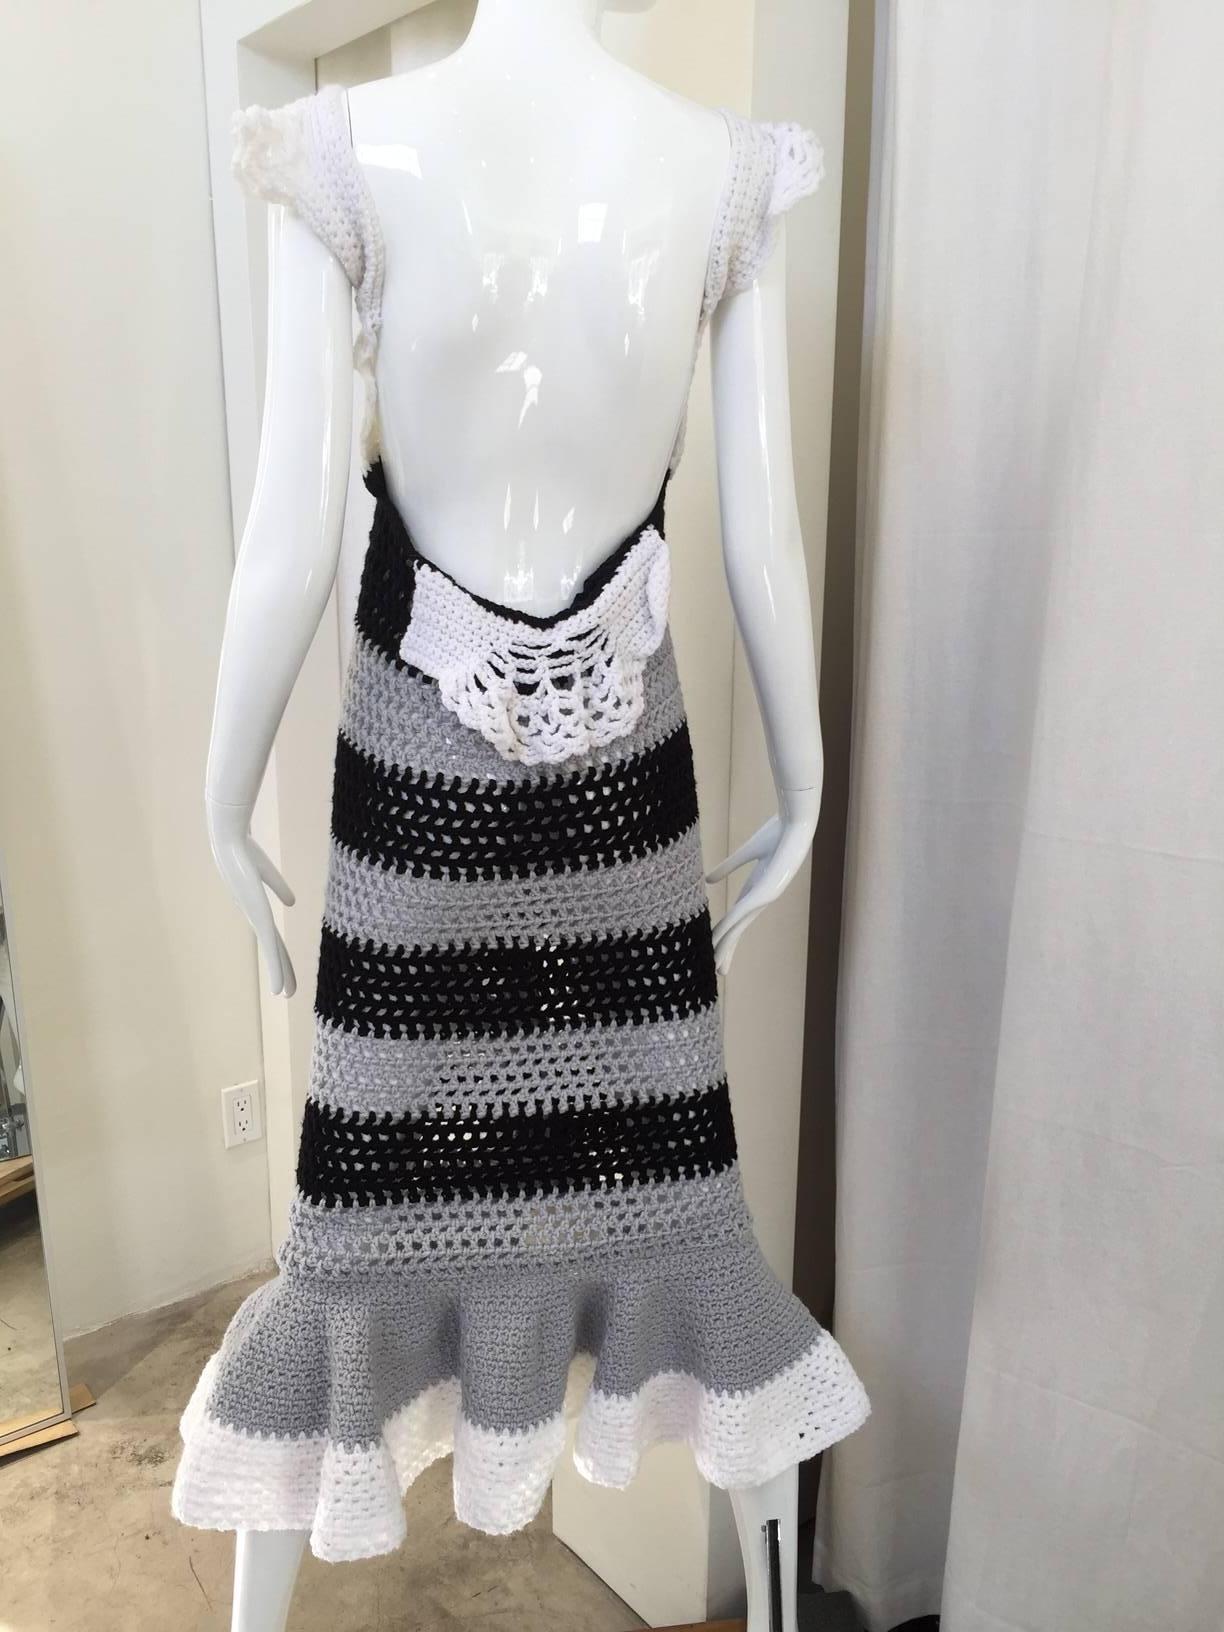 Sexy 70s  Crochet ruffle dress. 
color: grey and black
Size: 2/4
